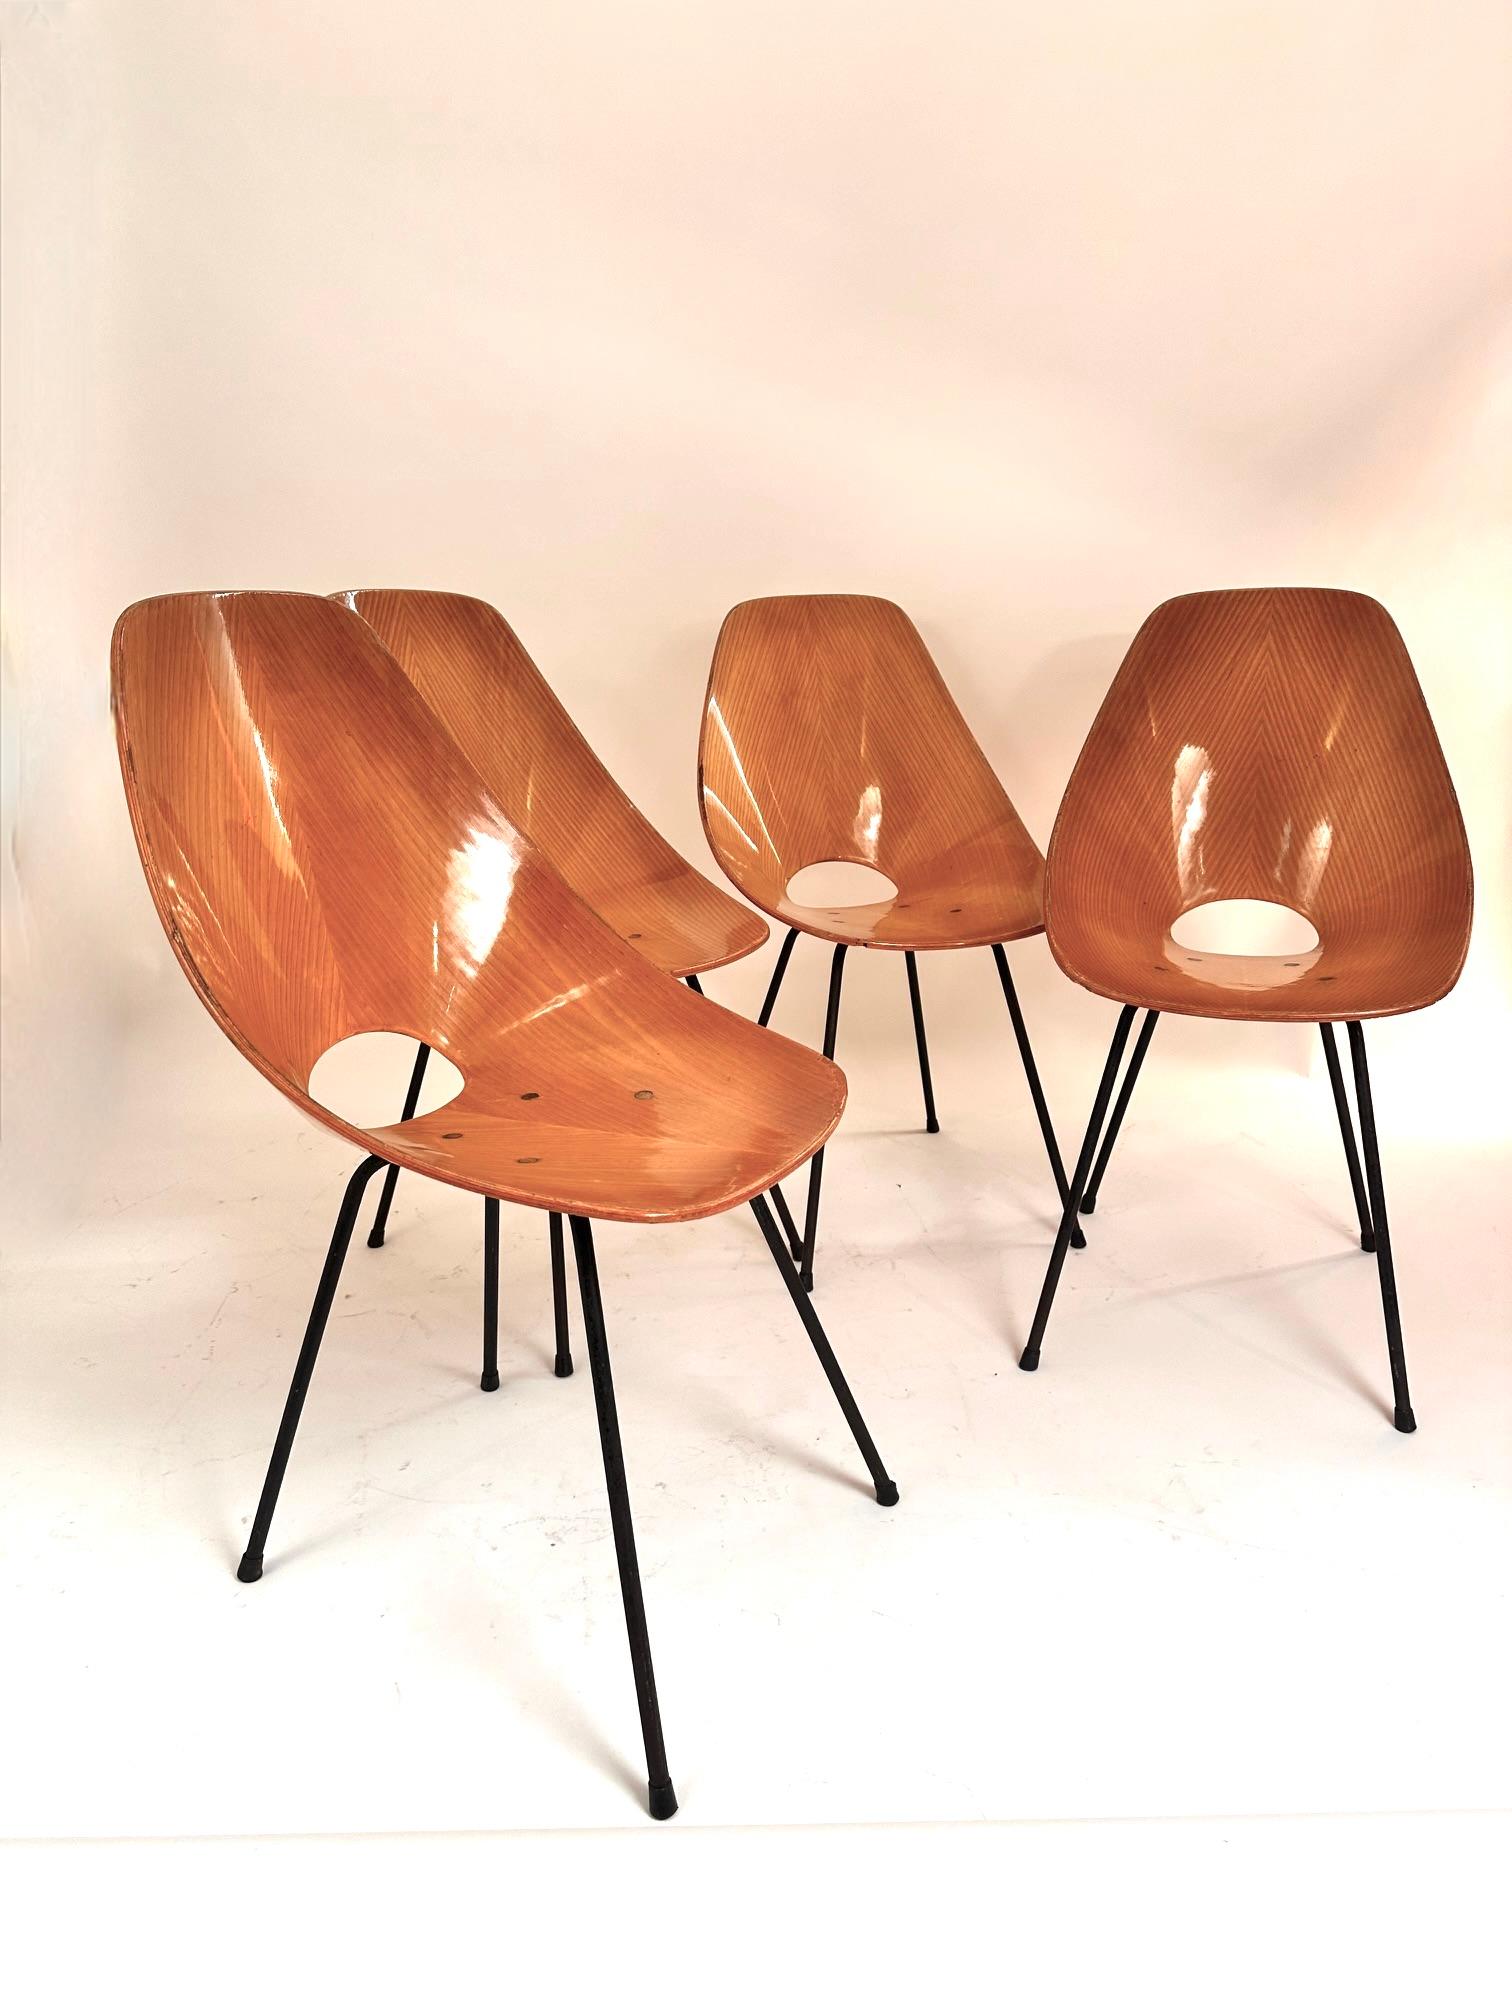 A superb set of four Medea chairs designed in the 50s by Vittorio Nobili and edited by Fratelli Tagliabue.Excellent structure condition and minor signs of use in tne edges.Beautiful  patina.
Free Shipping to USA and Europe.